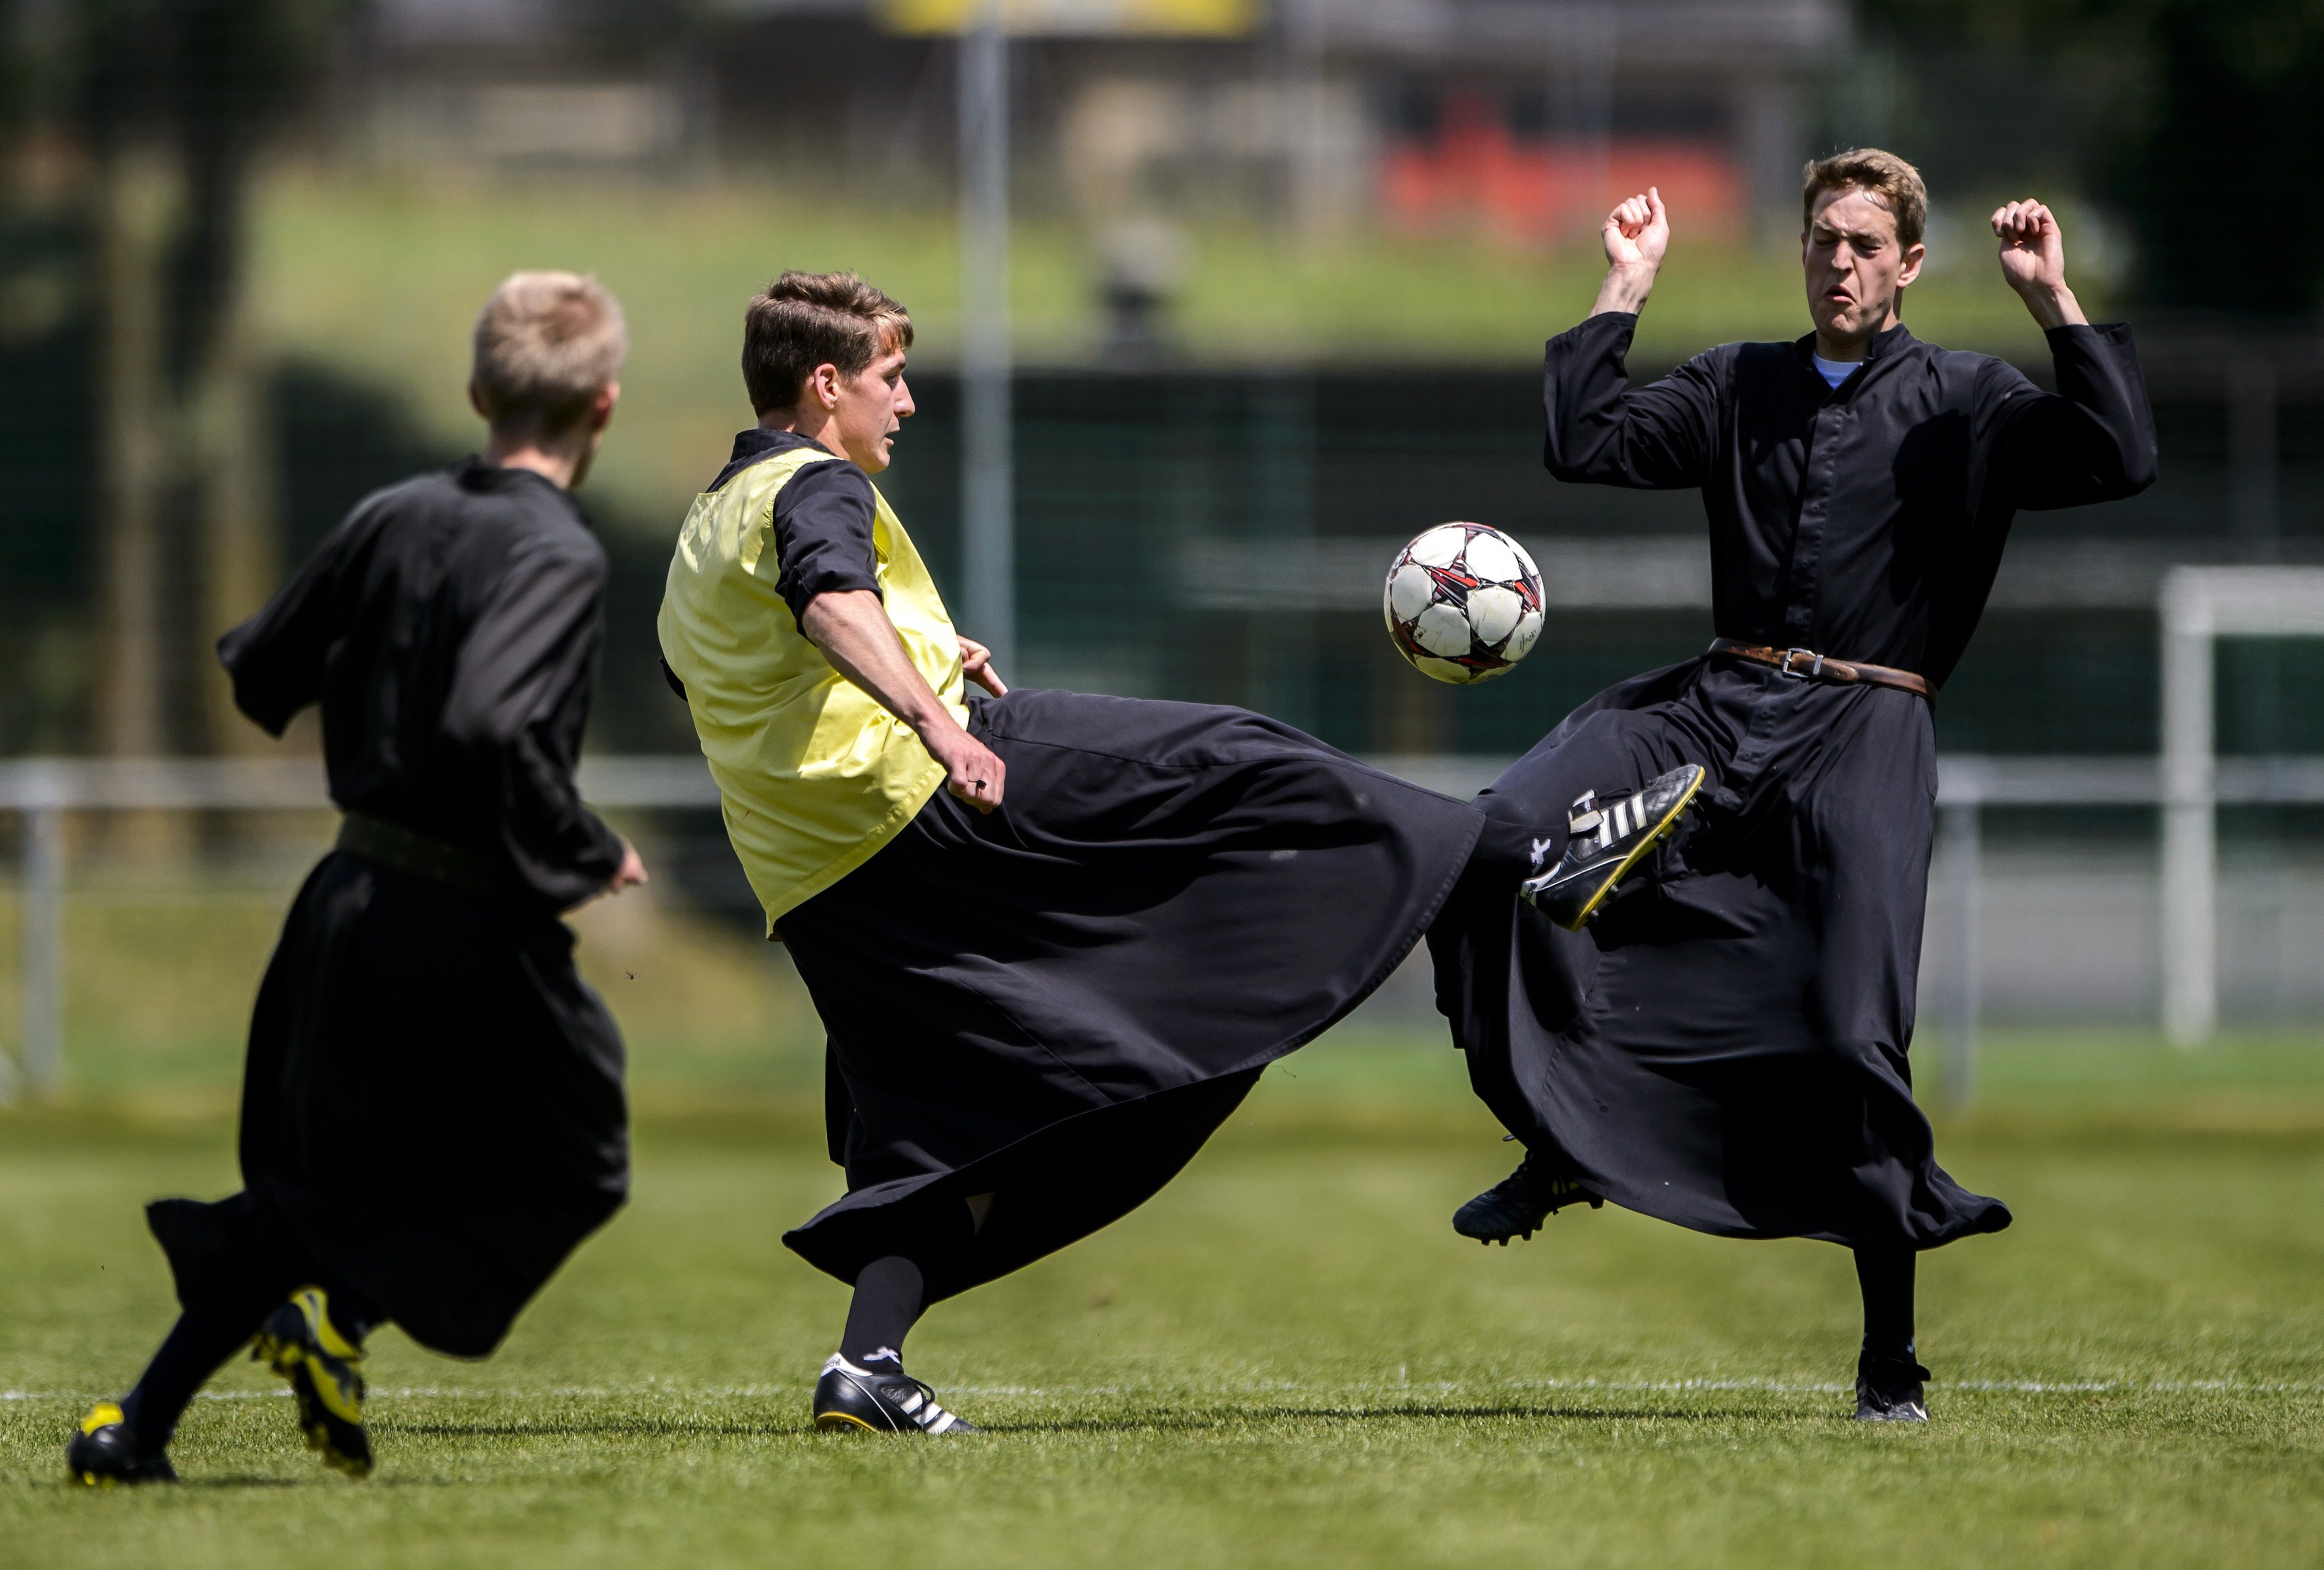 Seminarians of the International Seminary of Saint Pius X vie wearing their cassocks for the ball during a football game on May 25, 2014 in Riddes, Western Switzerland. After a whole week ded